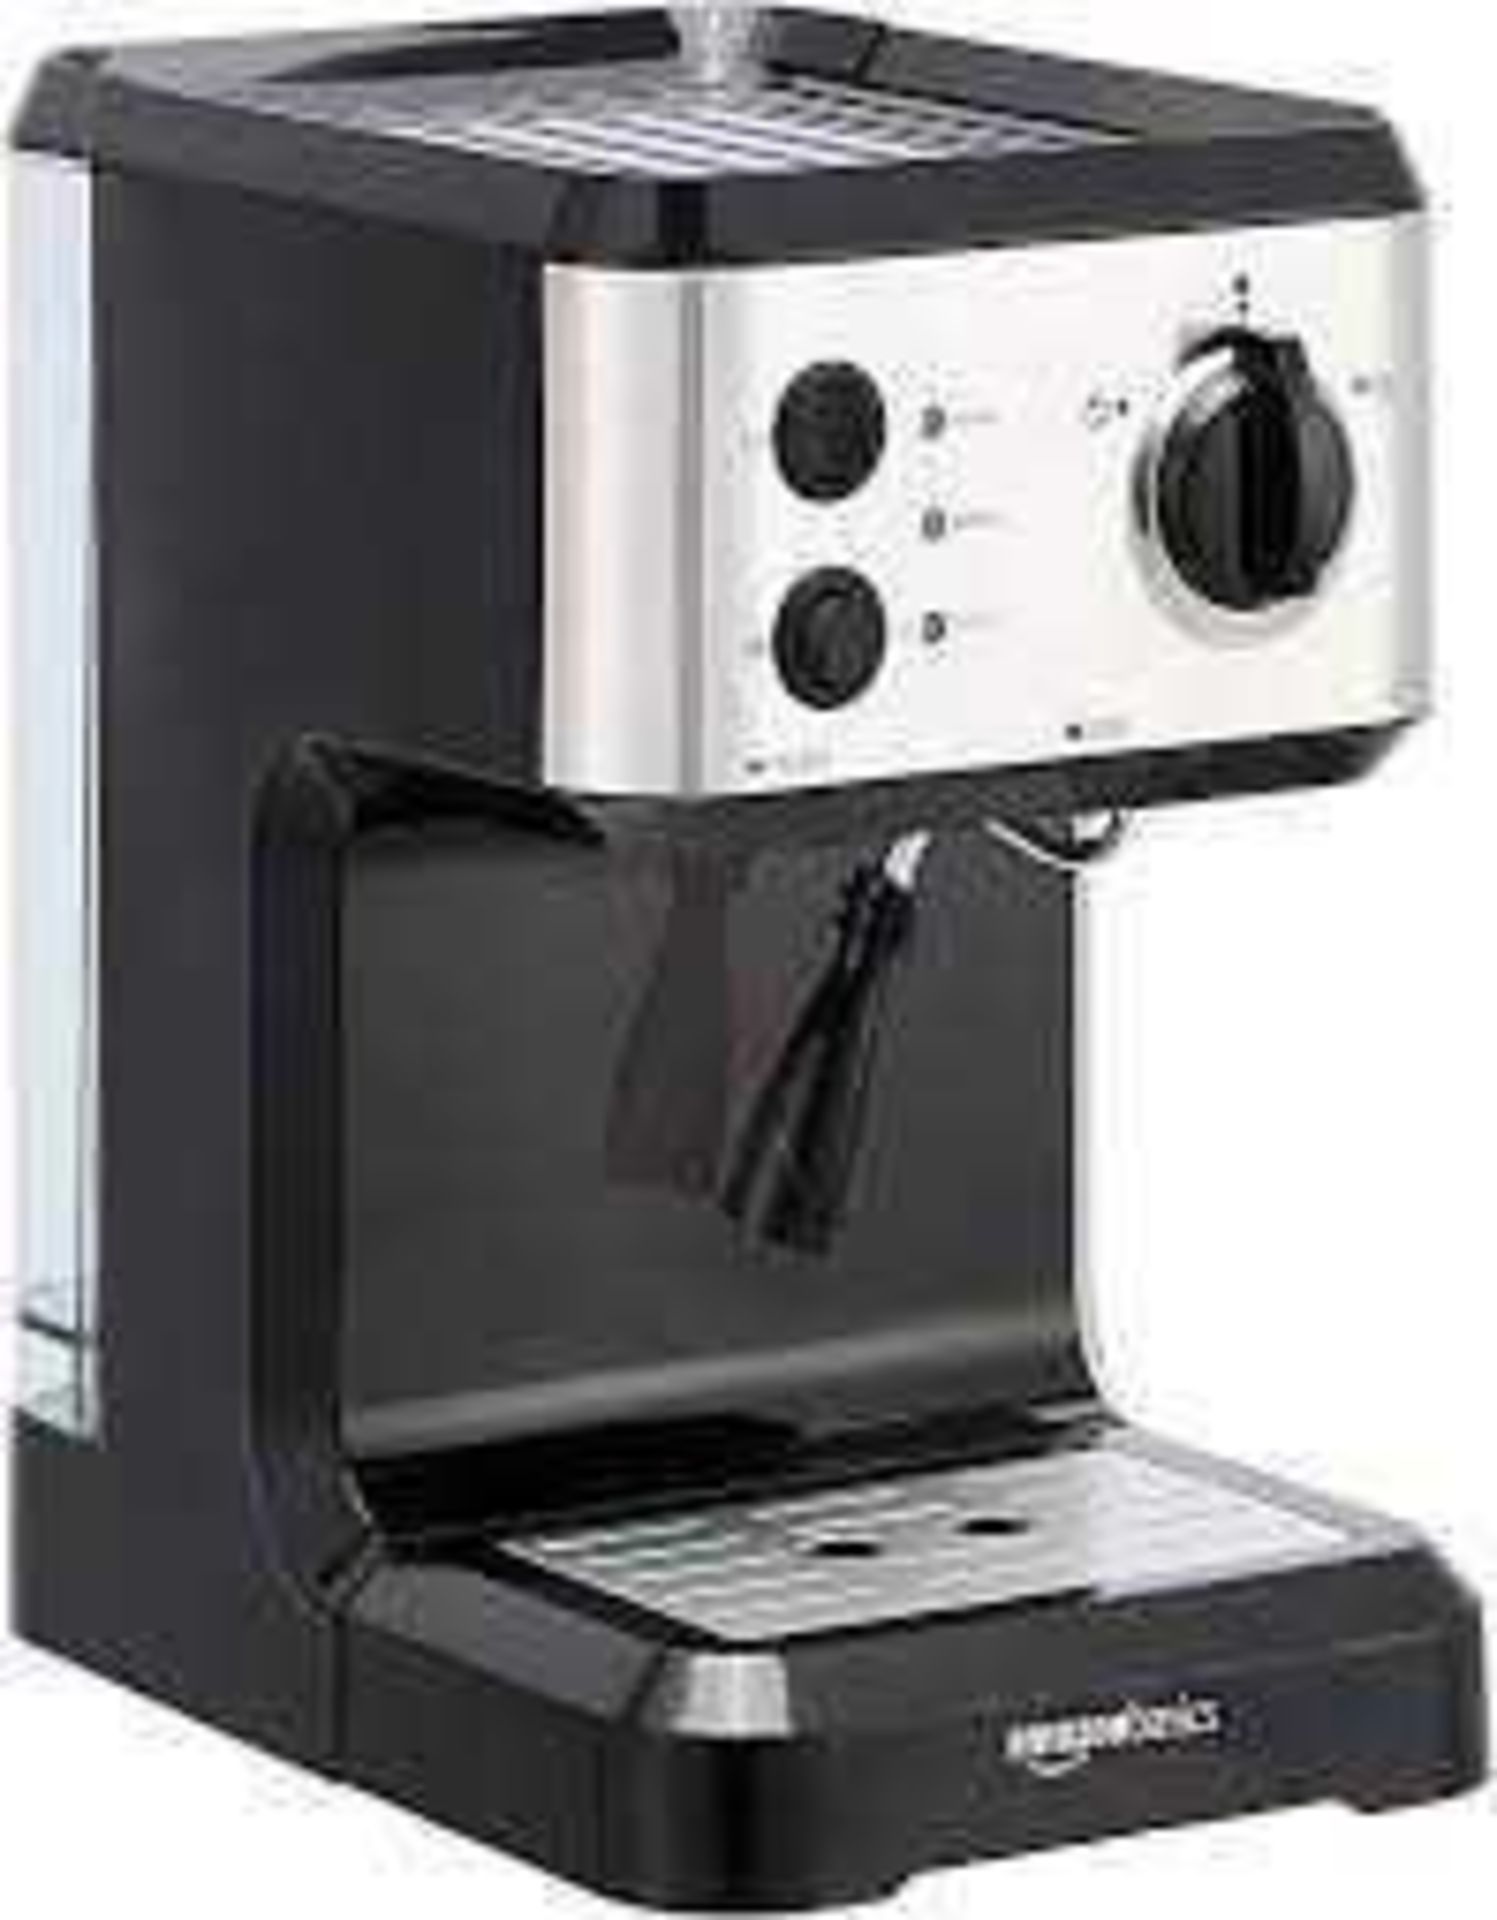 RRP £80 Boxed Amazon basics Espresso coffee machine with milk frother